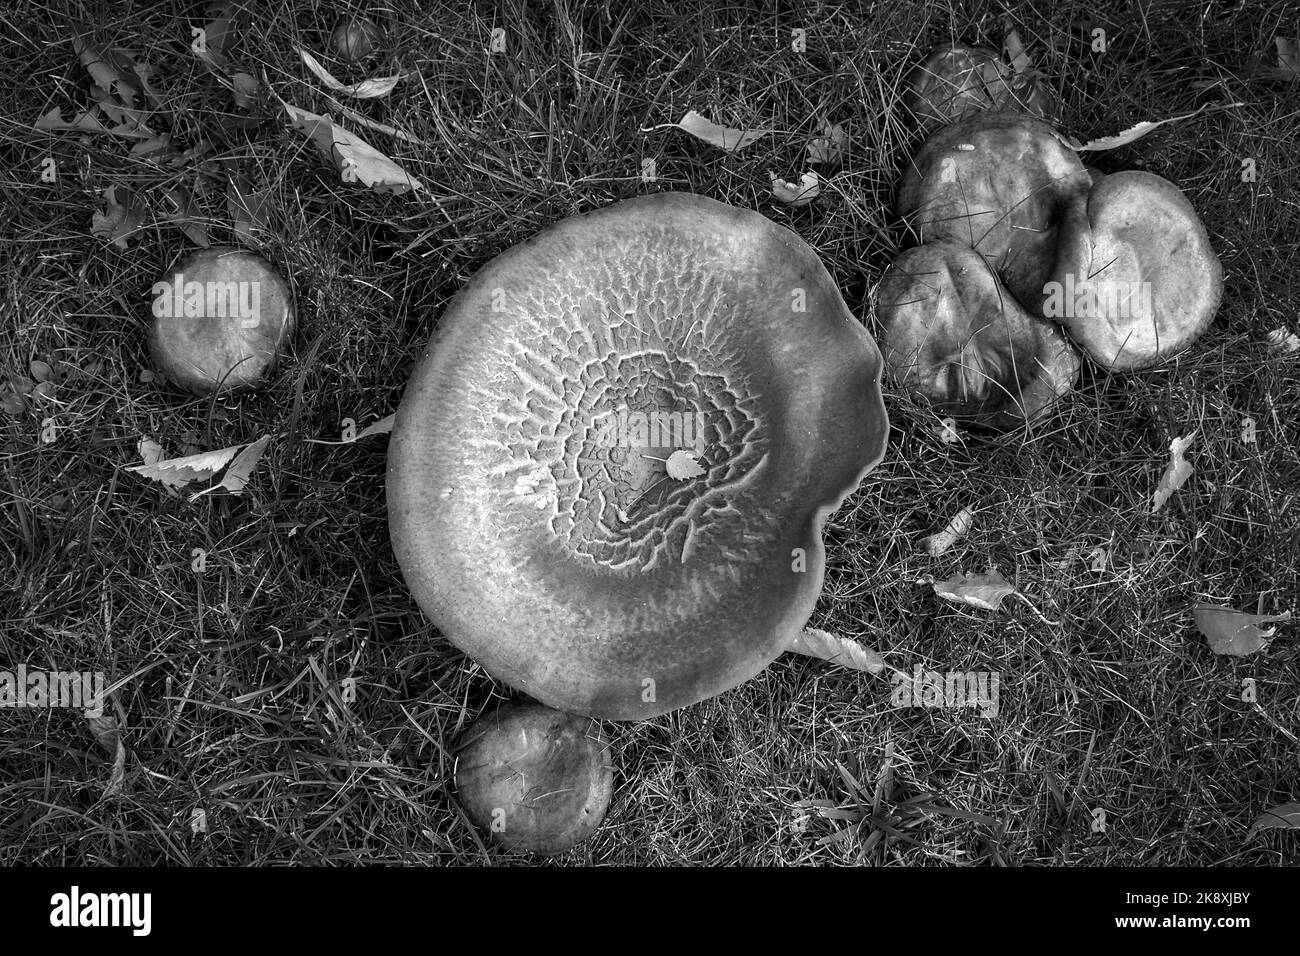 Mushrooms with autumn leaves in black and white Stock Photo